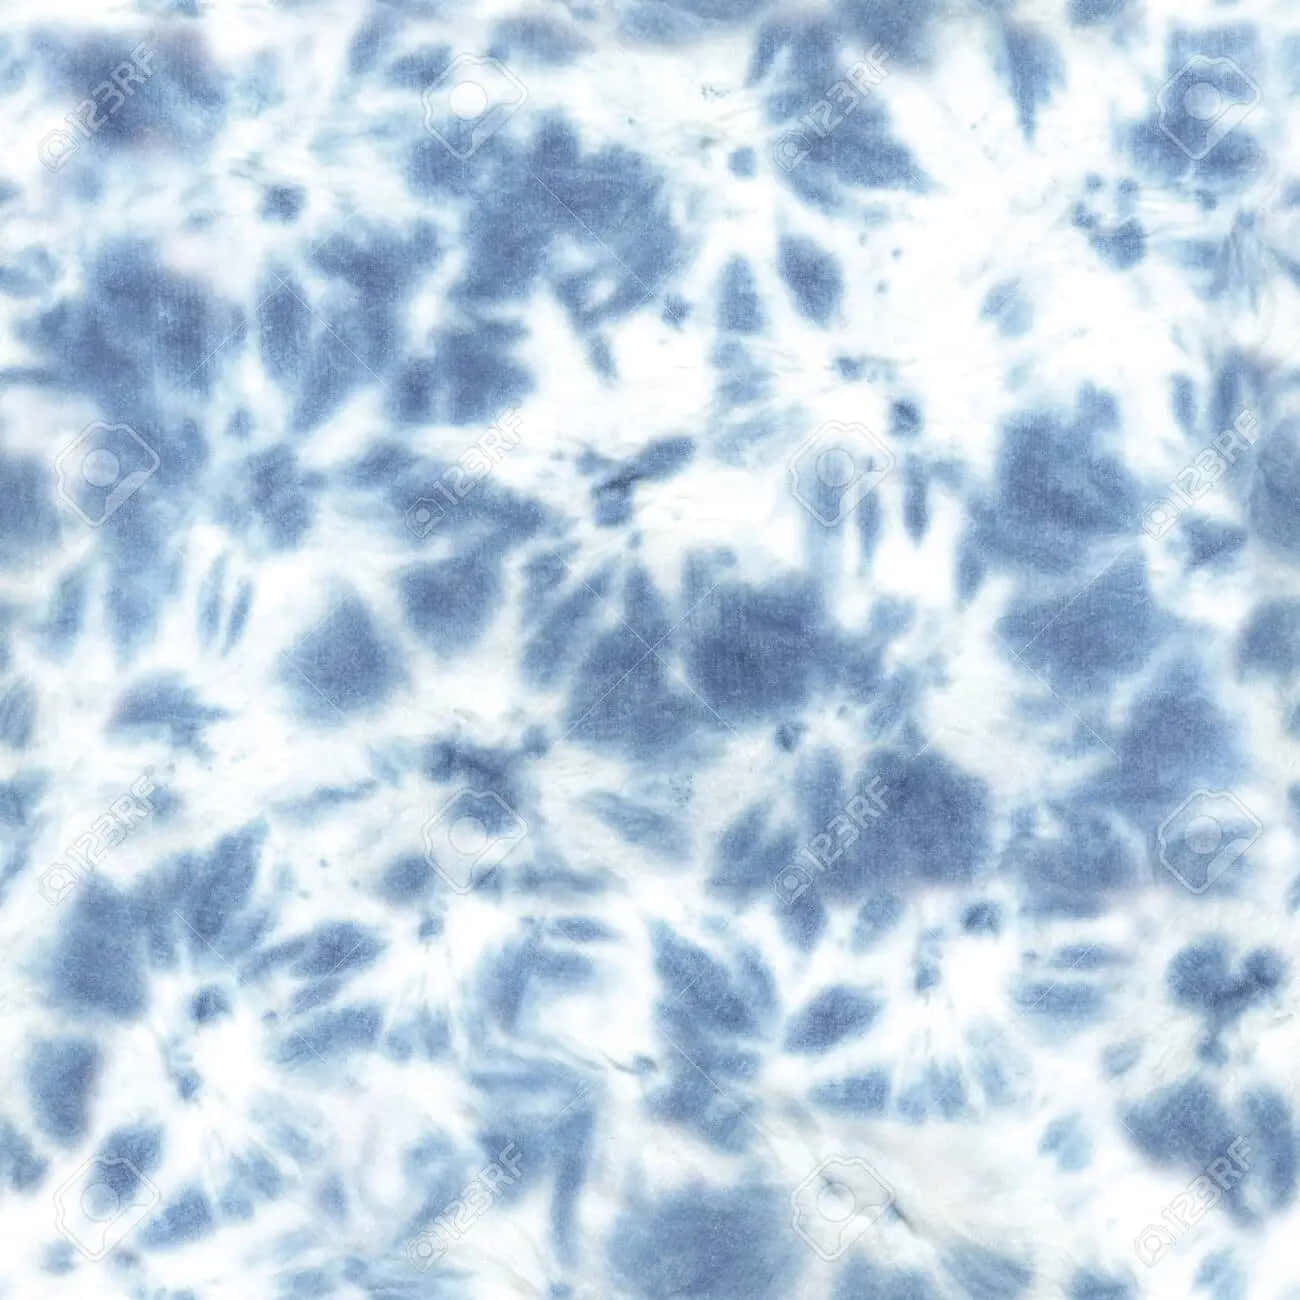 Blue And White Tie Dye Background. Wallpaper